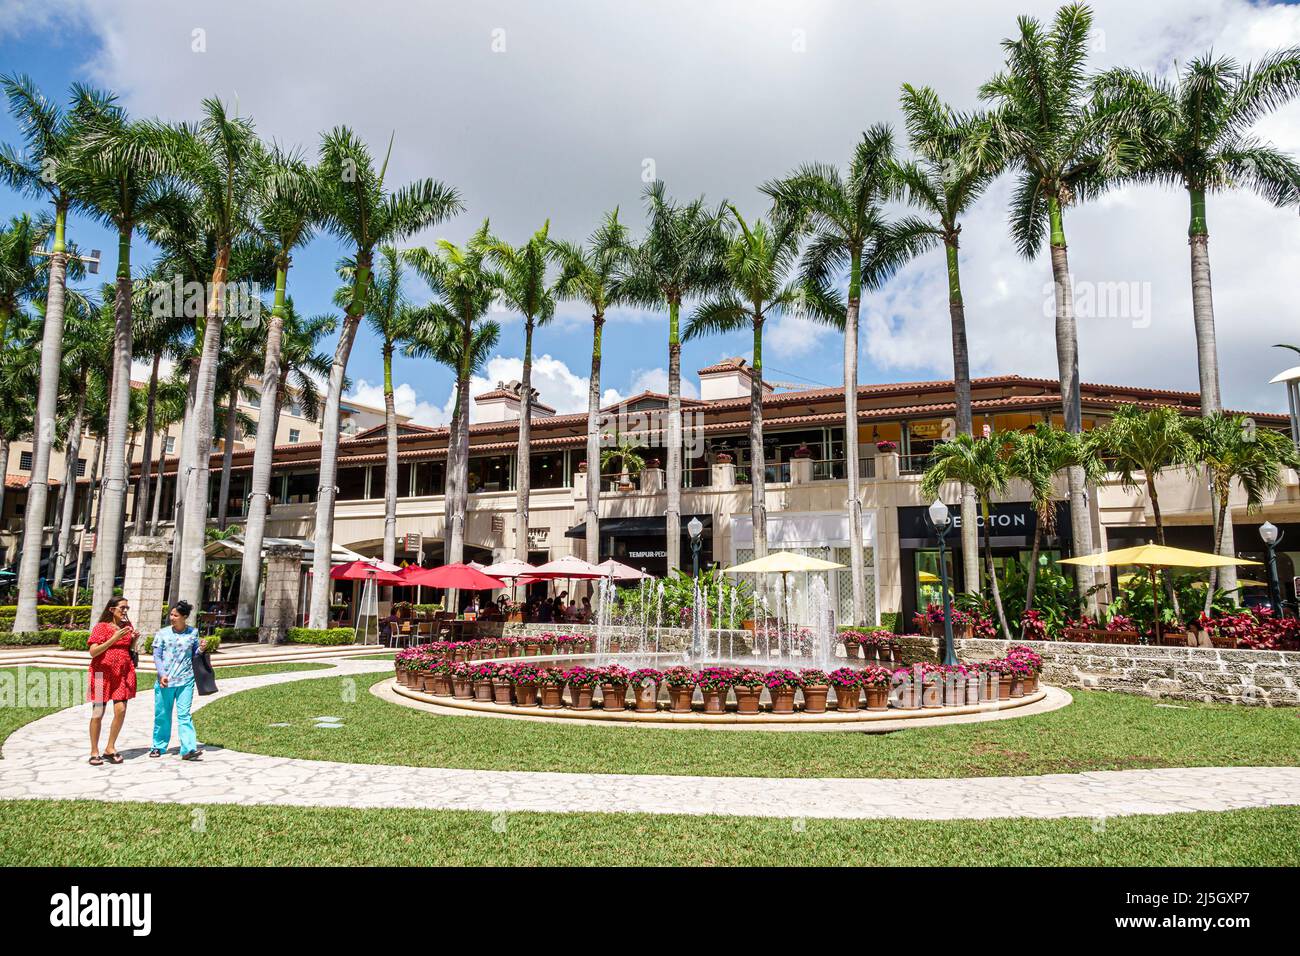 Miami Florida Coral Gables Shops at Merrick Park upscale outdoor shopping mall fountain women friends walking talking Stock Photo